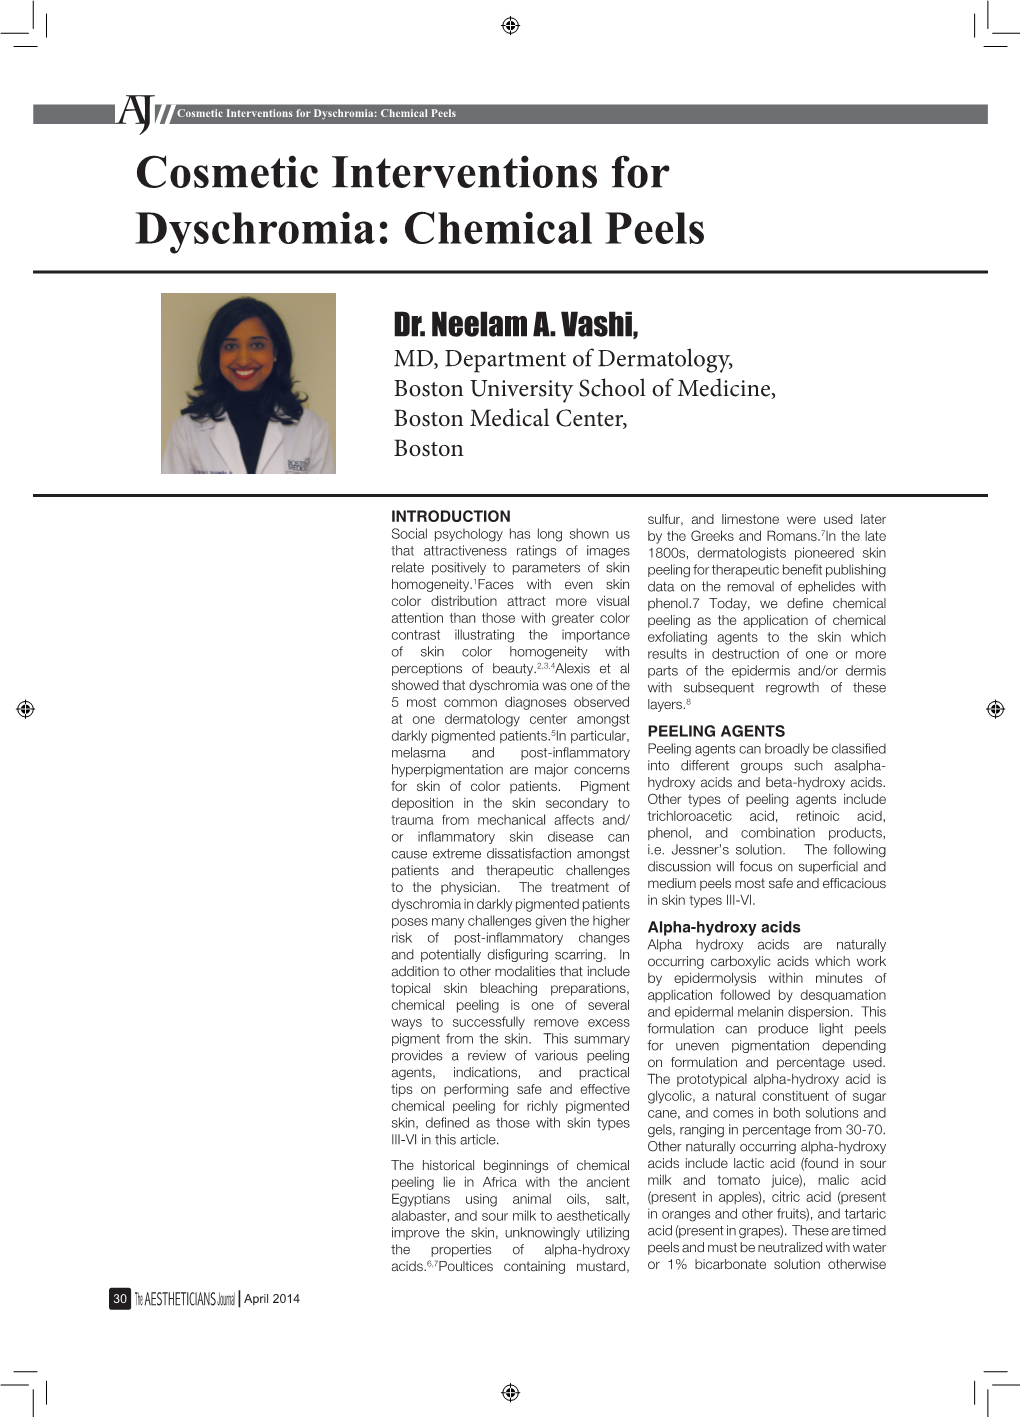 Cosmetic Interventions for Dyschromia: Chemical Peels Cosmetic Interventions for Dyschromia: Chemical Peels